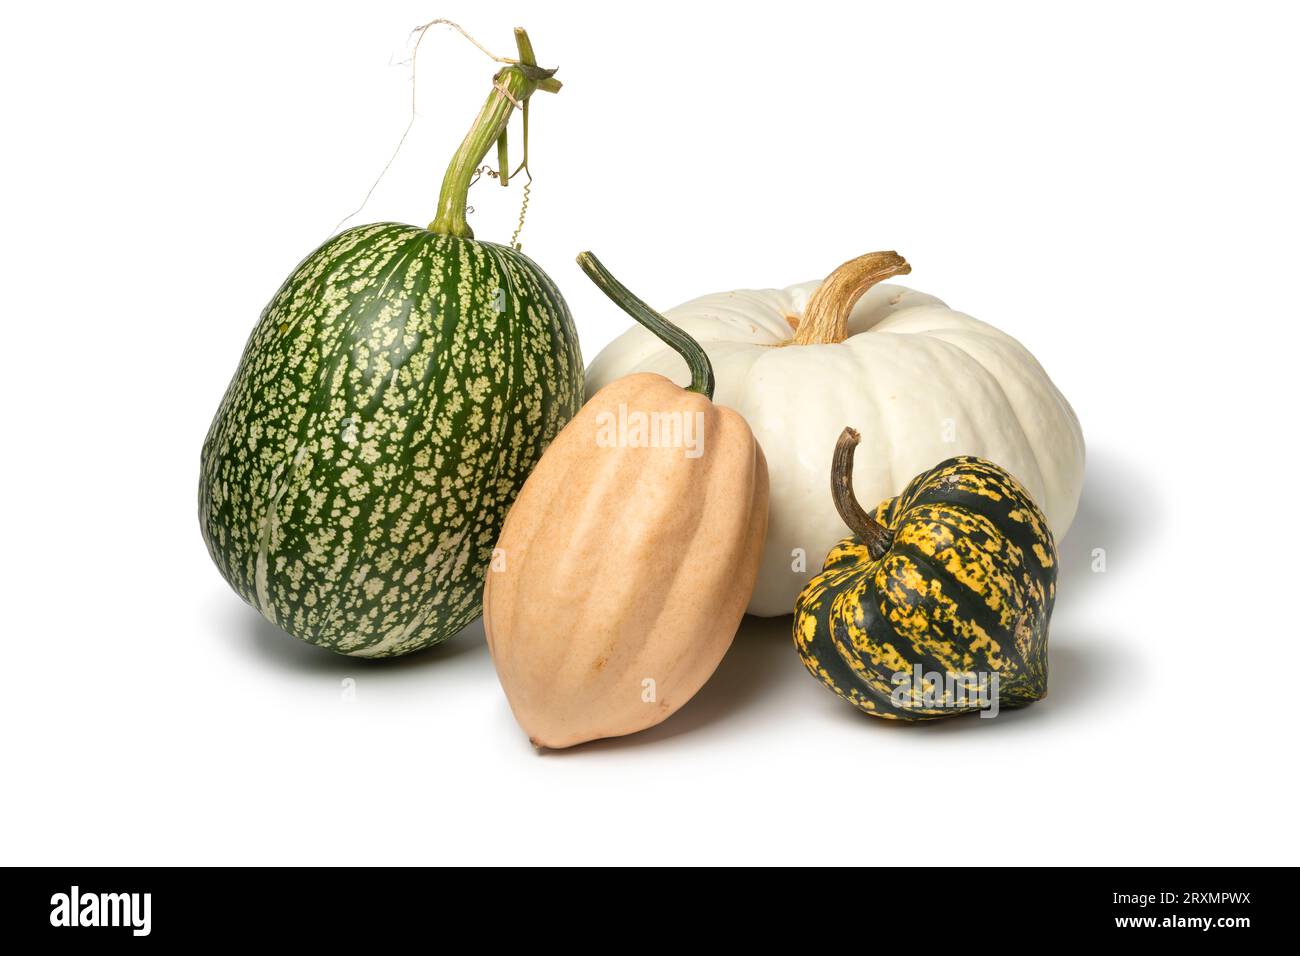 Variation of fresh raw edible pumpkins isolated on white background close up Stock Photo